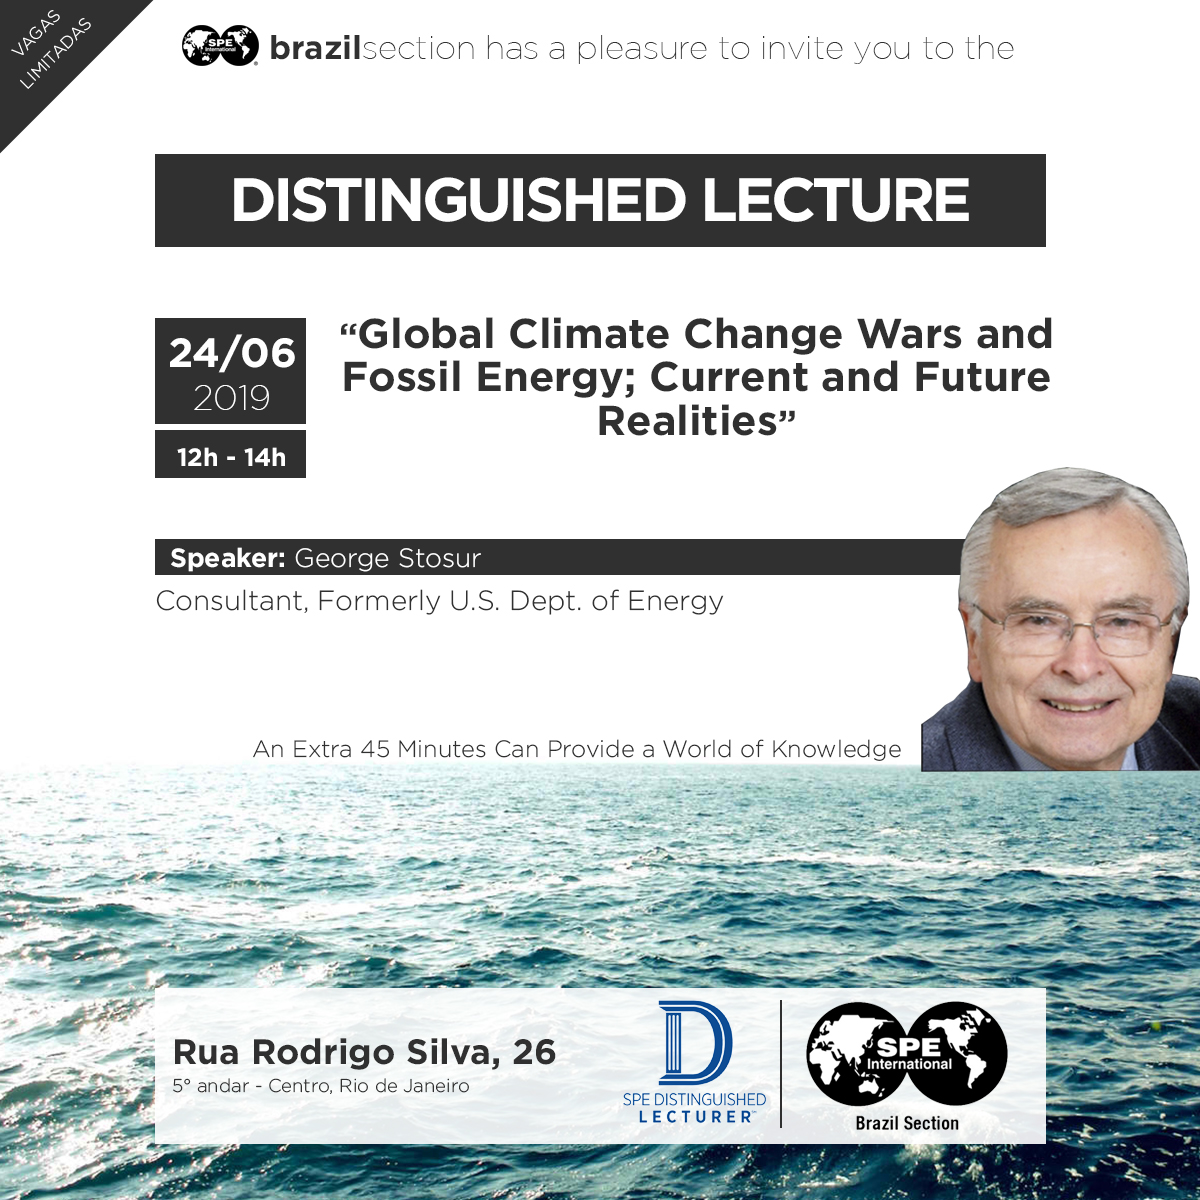 Distinguished Lecturer: Global Climate Change Wars and Fossil Energy; Current and Future Realities